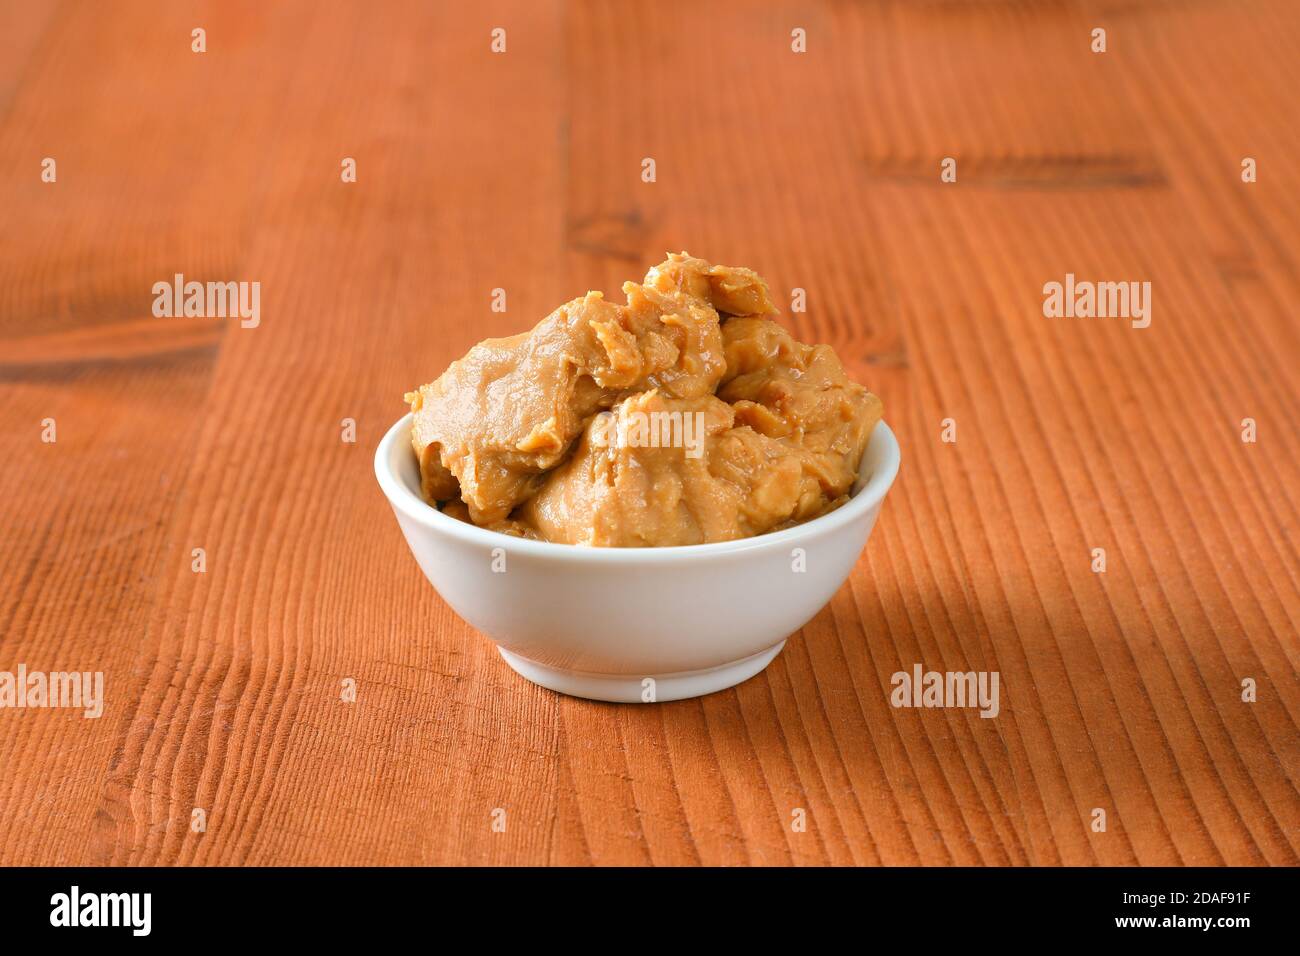 Crunchy peanut butter in white bowl on wooden background Stock Photo